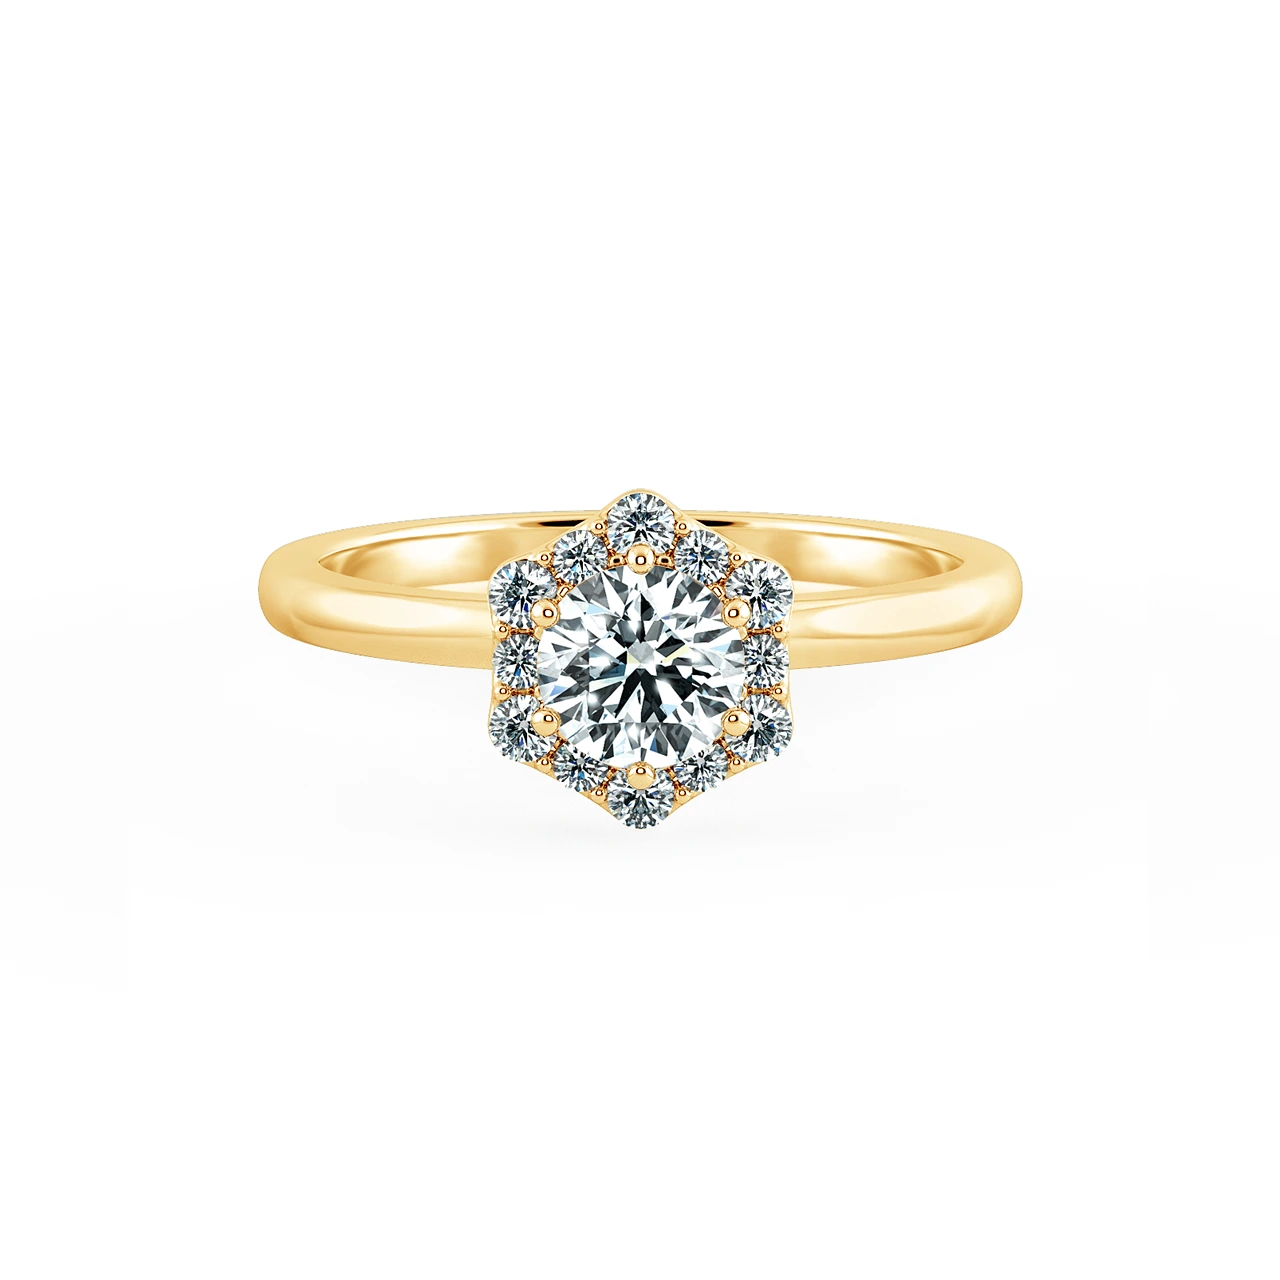 Single Classic Octagonal Halo Engagement Ring NCH2104 1